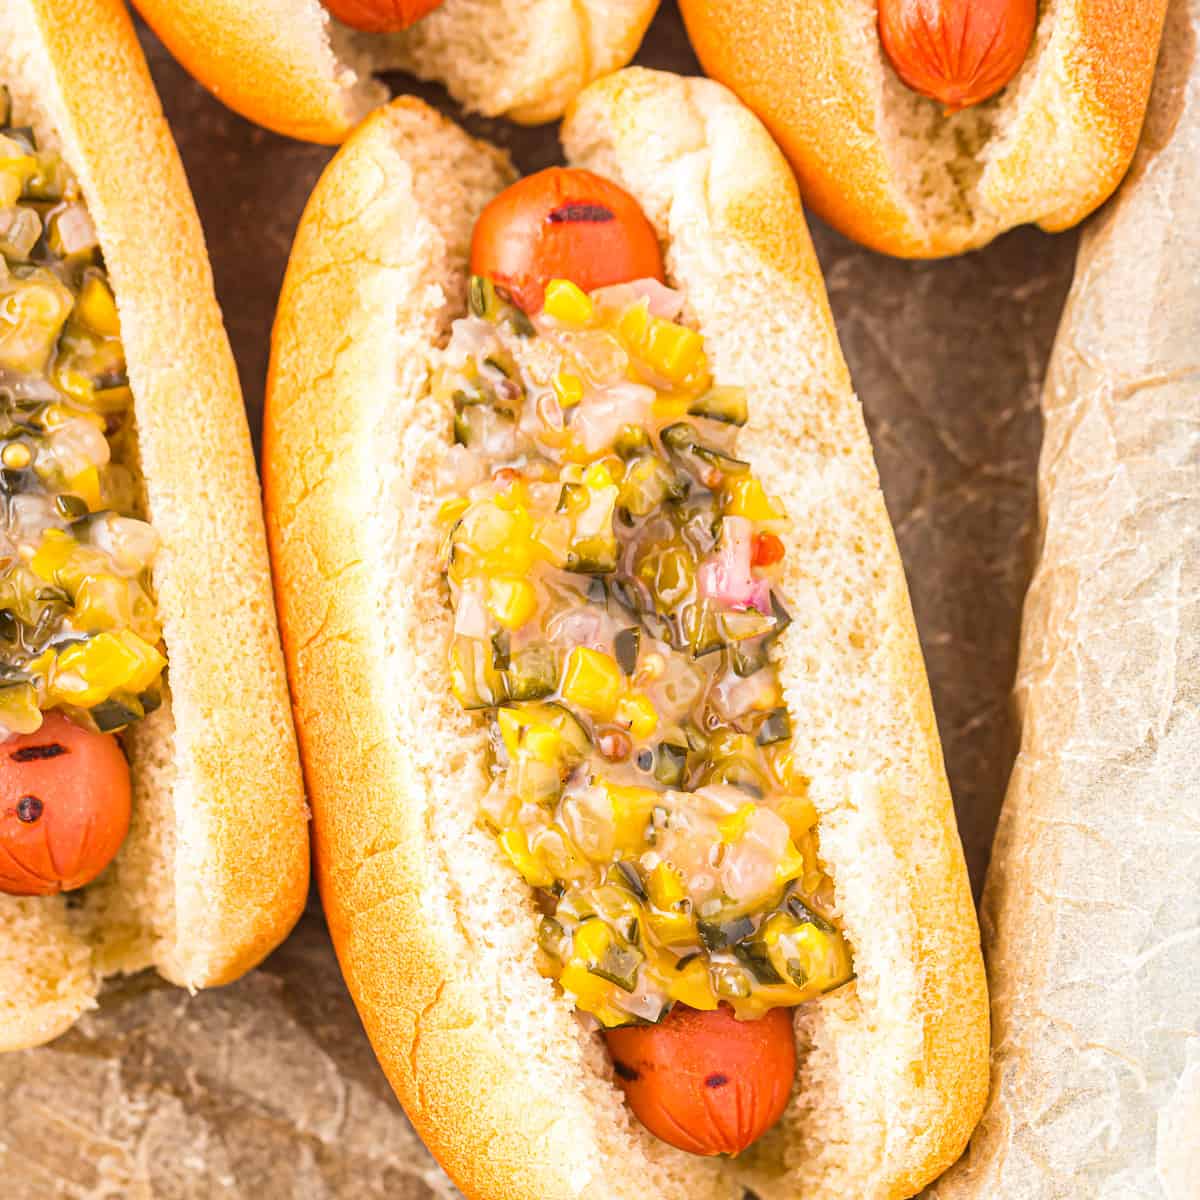 https://www.thecookierookie.com/wp-content/uploads/2023/03/featured-hot-dog-relish-recipe.jpg